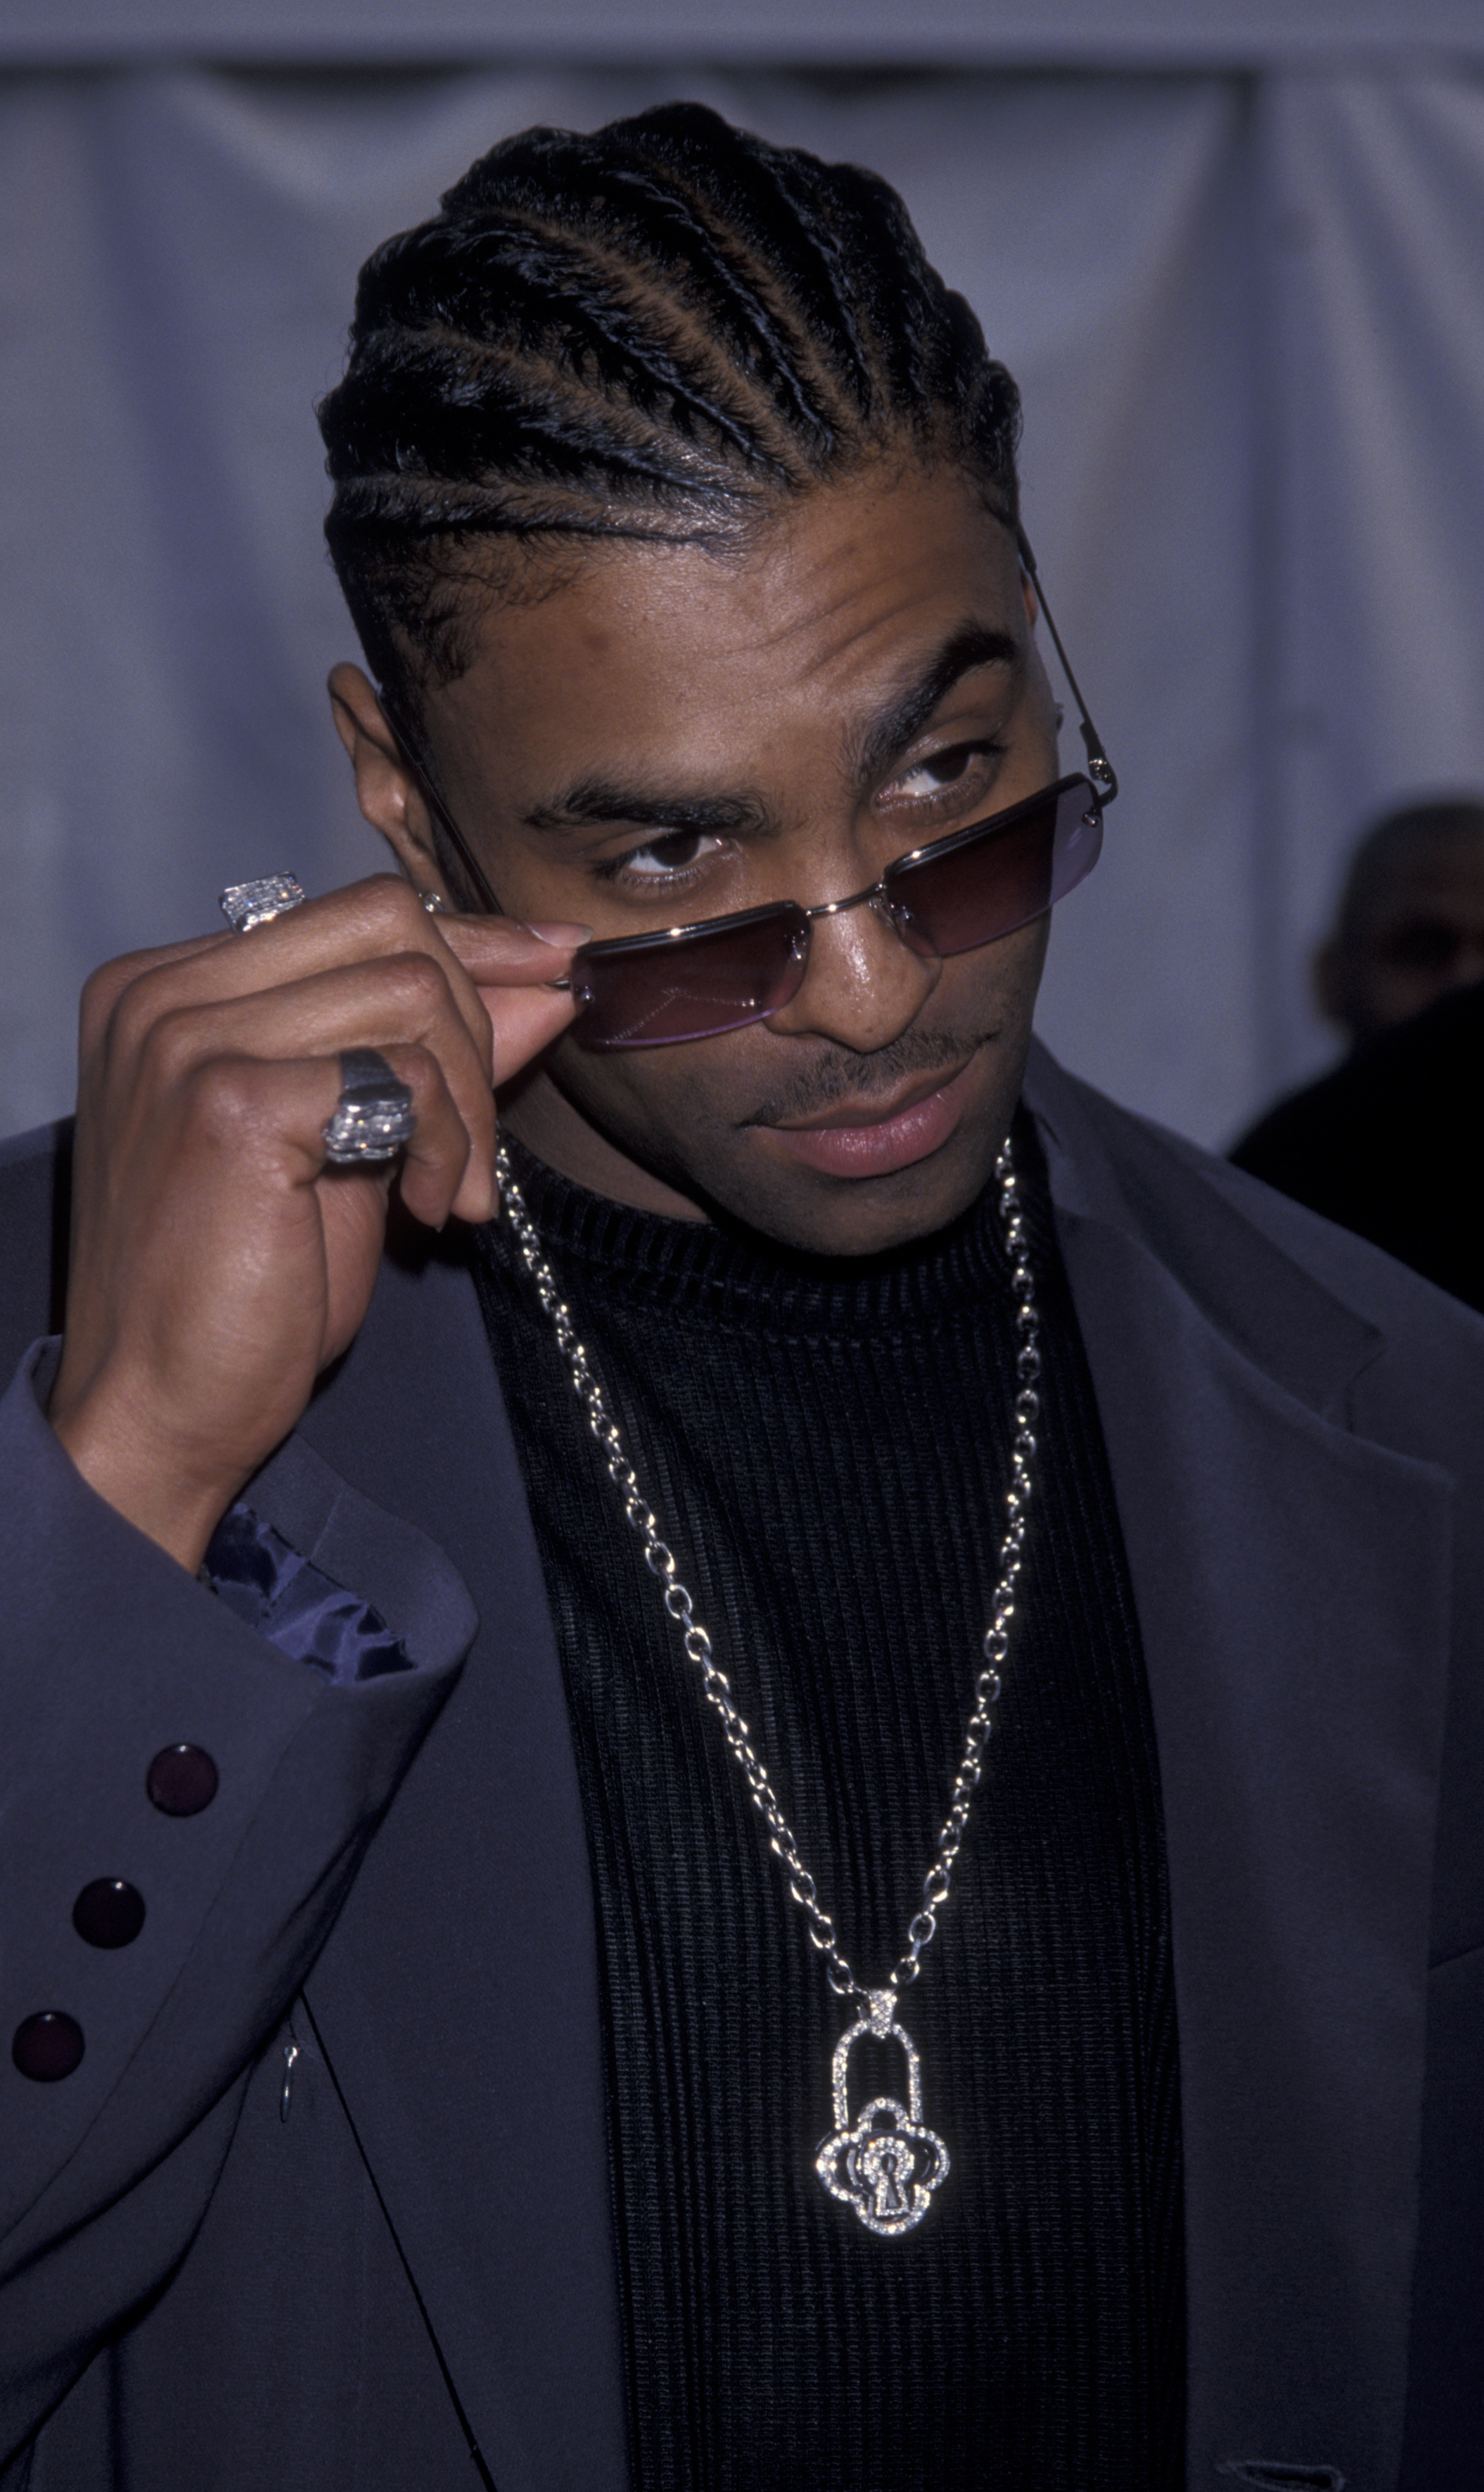 Ginuwine looking over his sunglasses